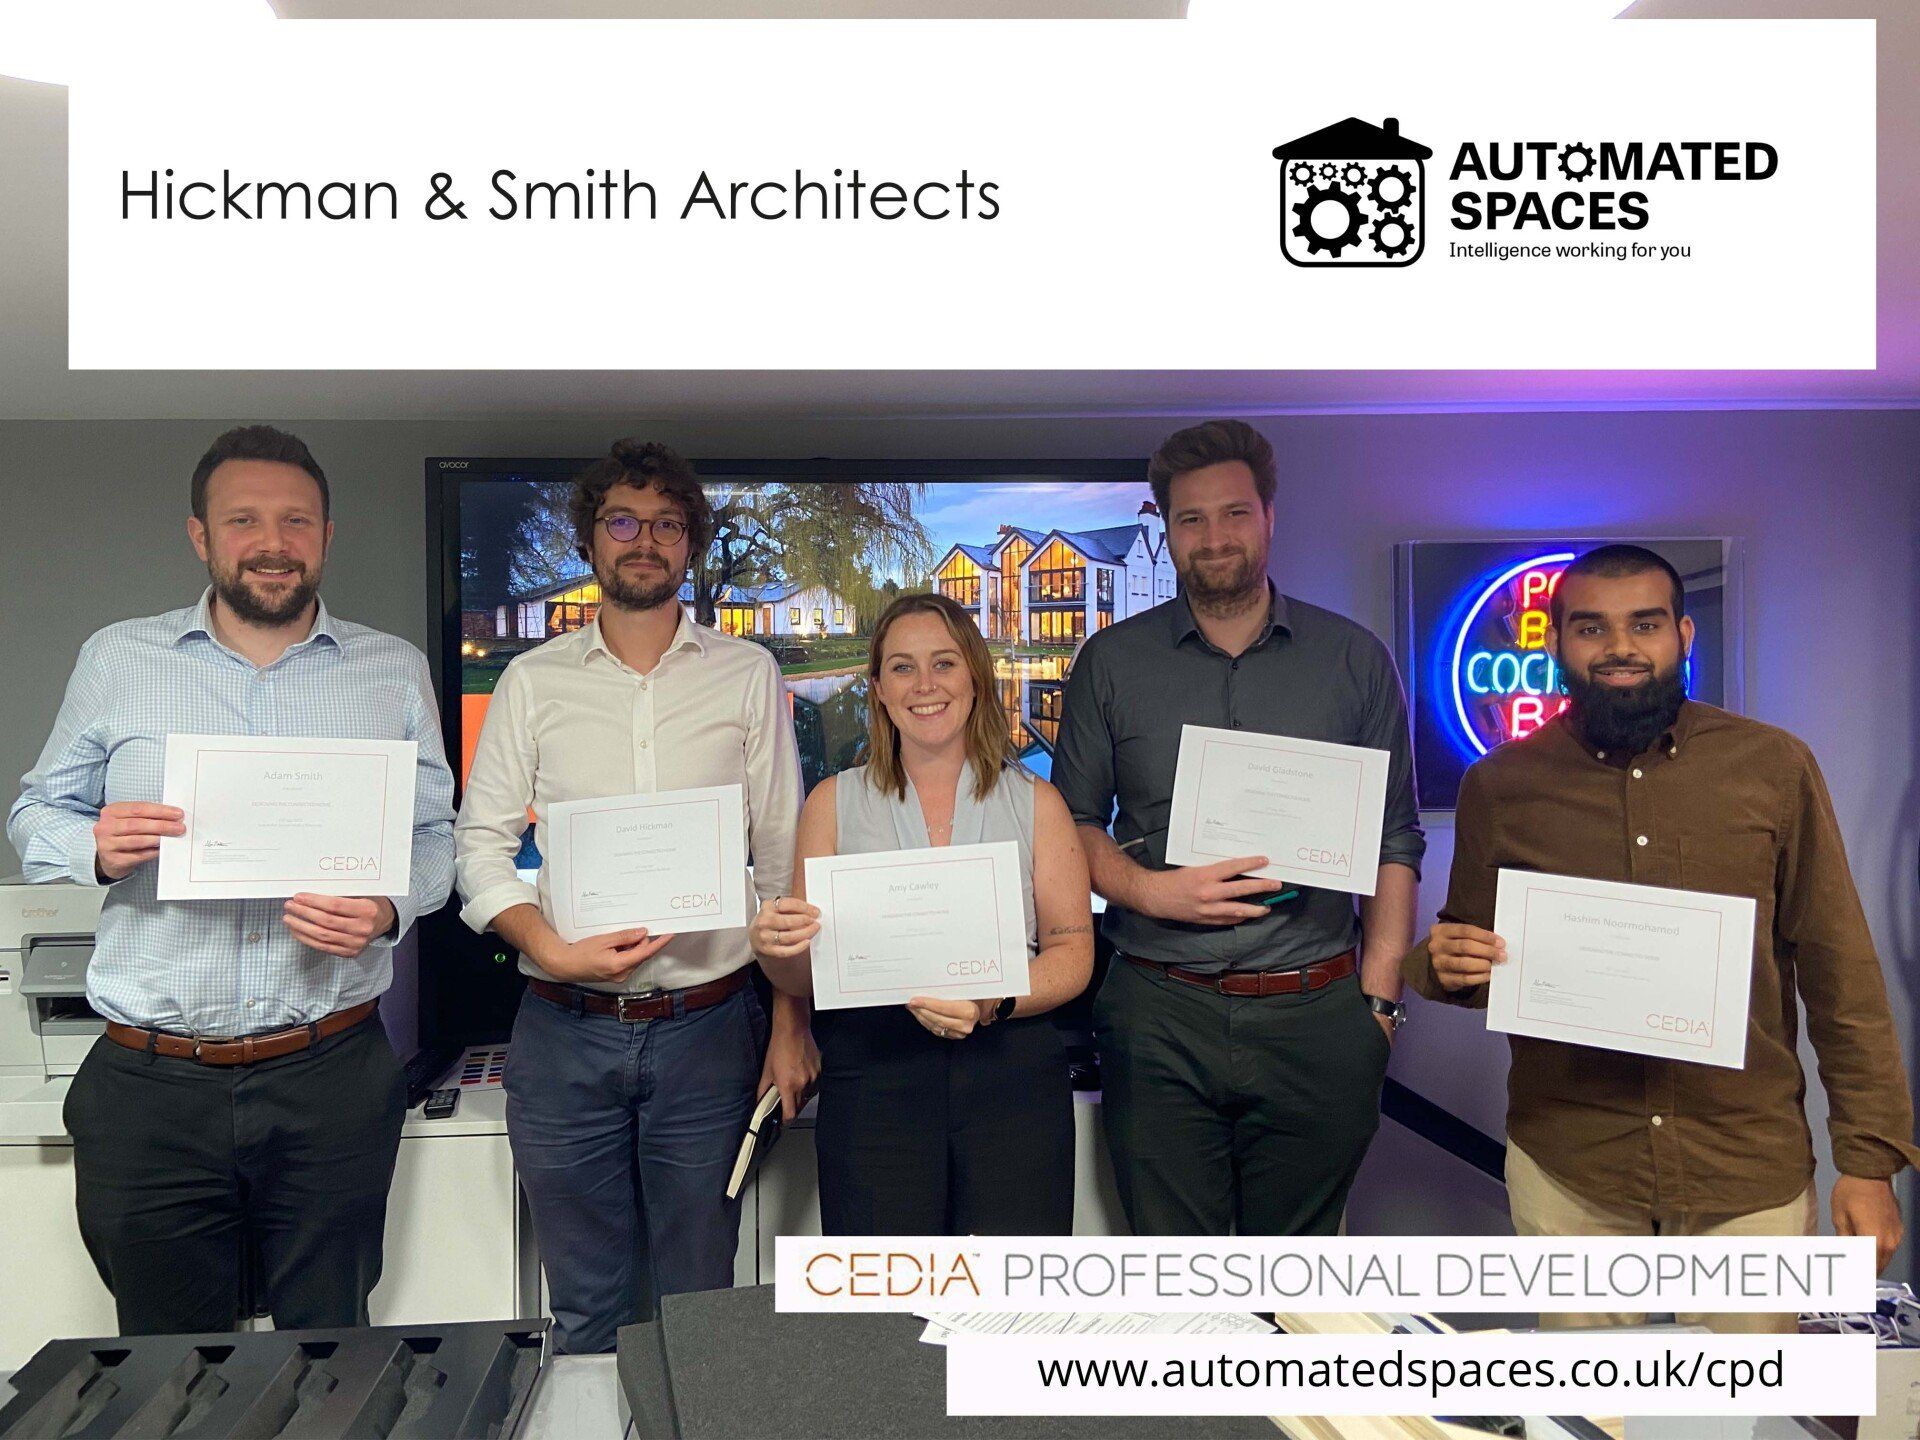 Photograph of Hickman and Smith Architects attending a CPD at Automated Spaces